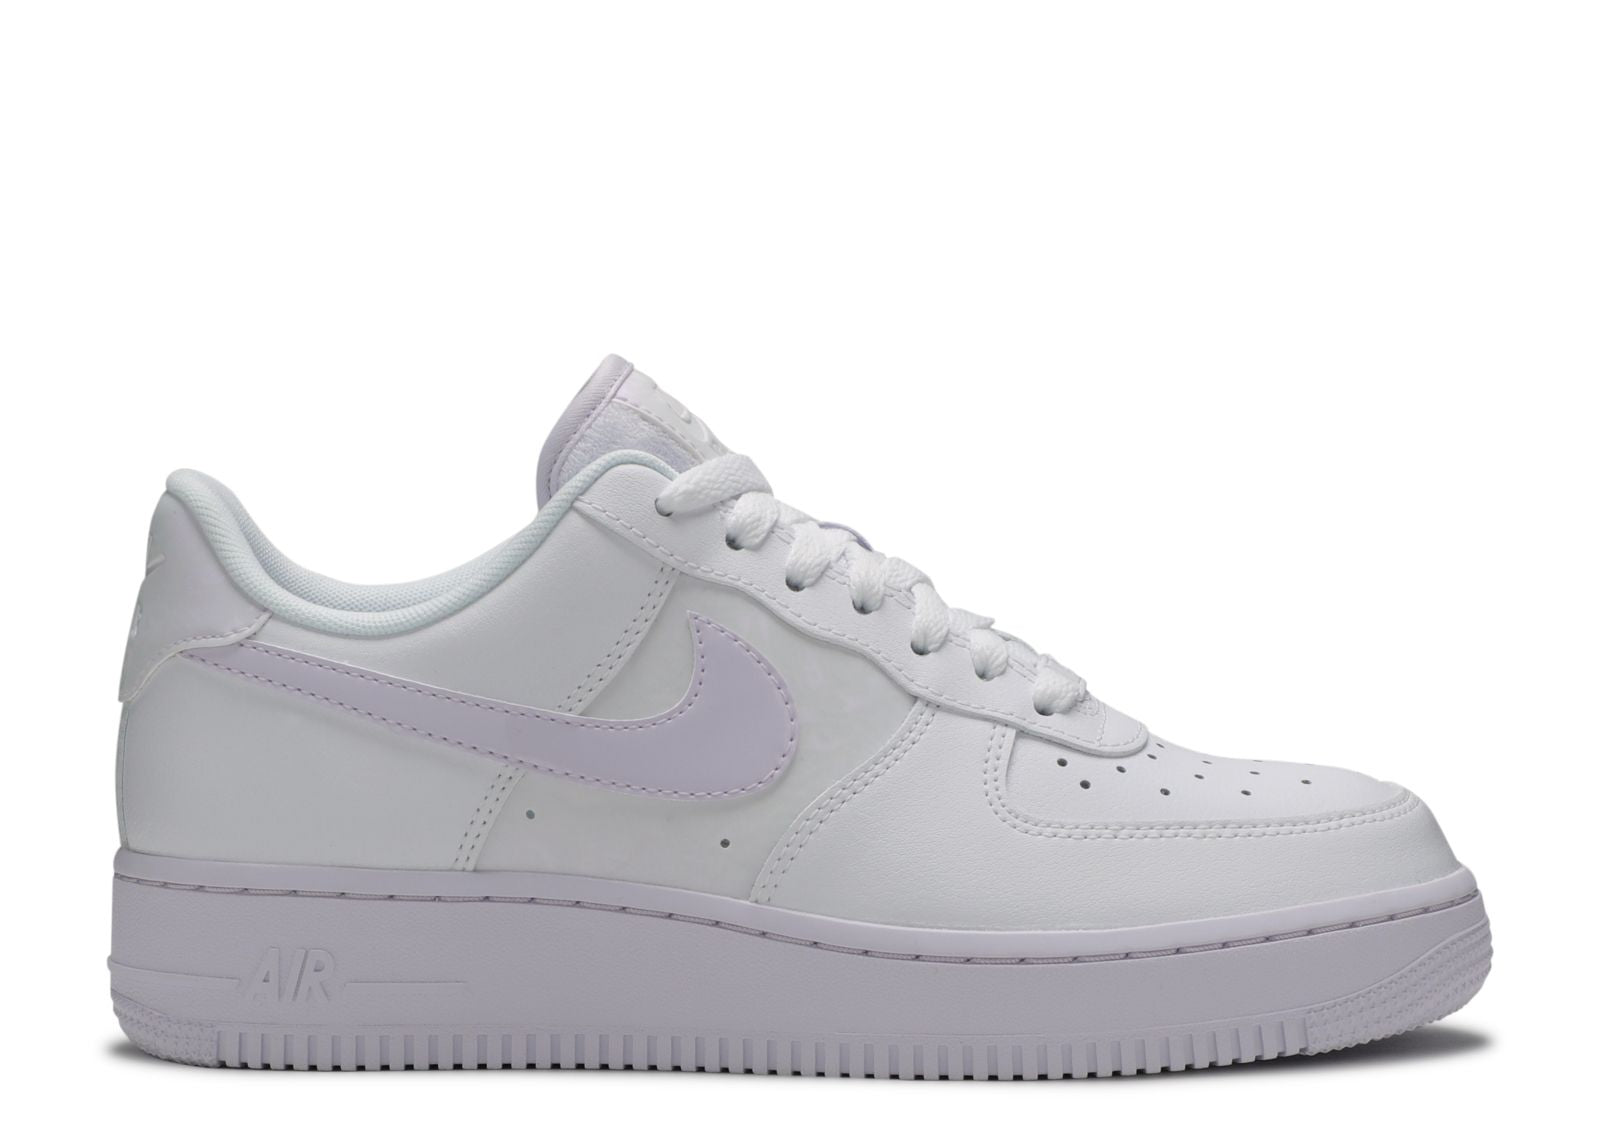 Second Chance - Multi Nike Air Force 1 Low White Barely Grape (W) - 36 | NEW